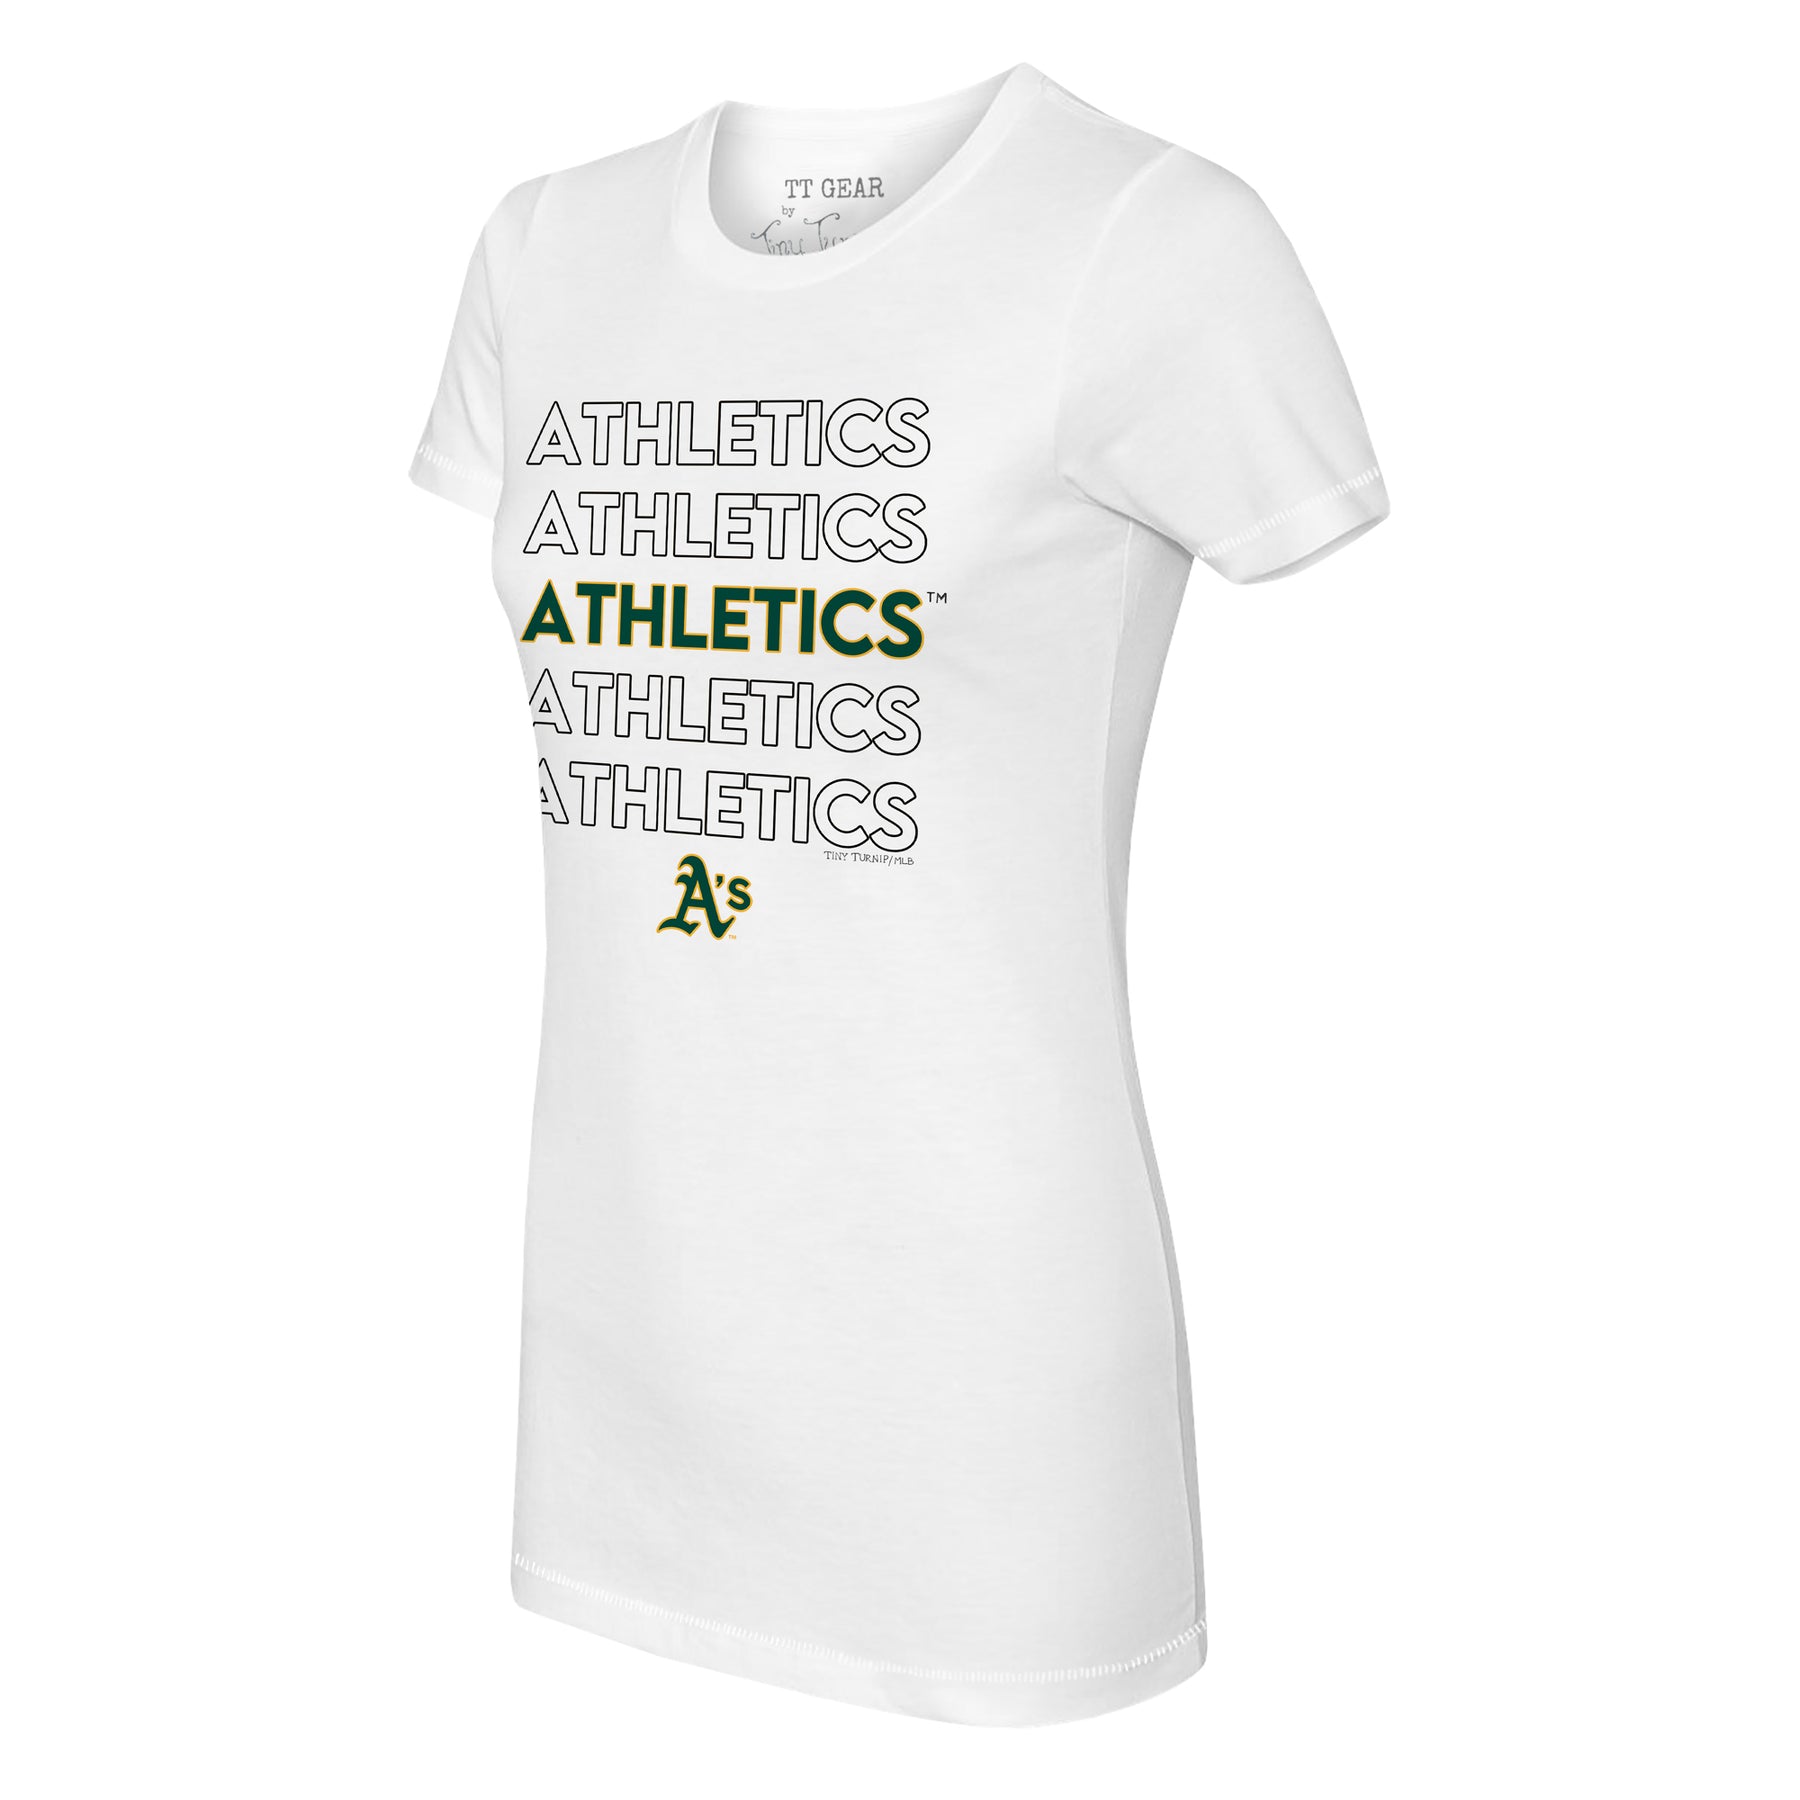 Oakland Athletics T-Shirts for Sale